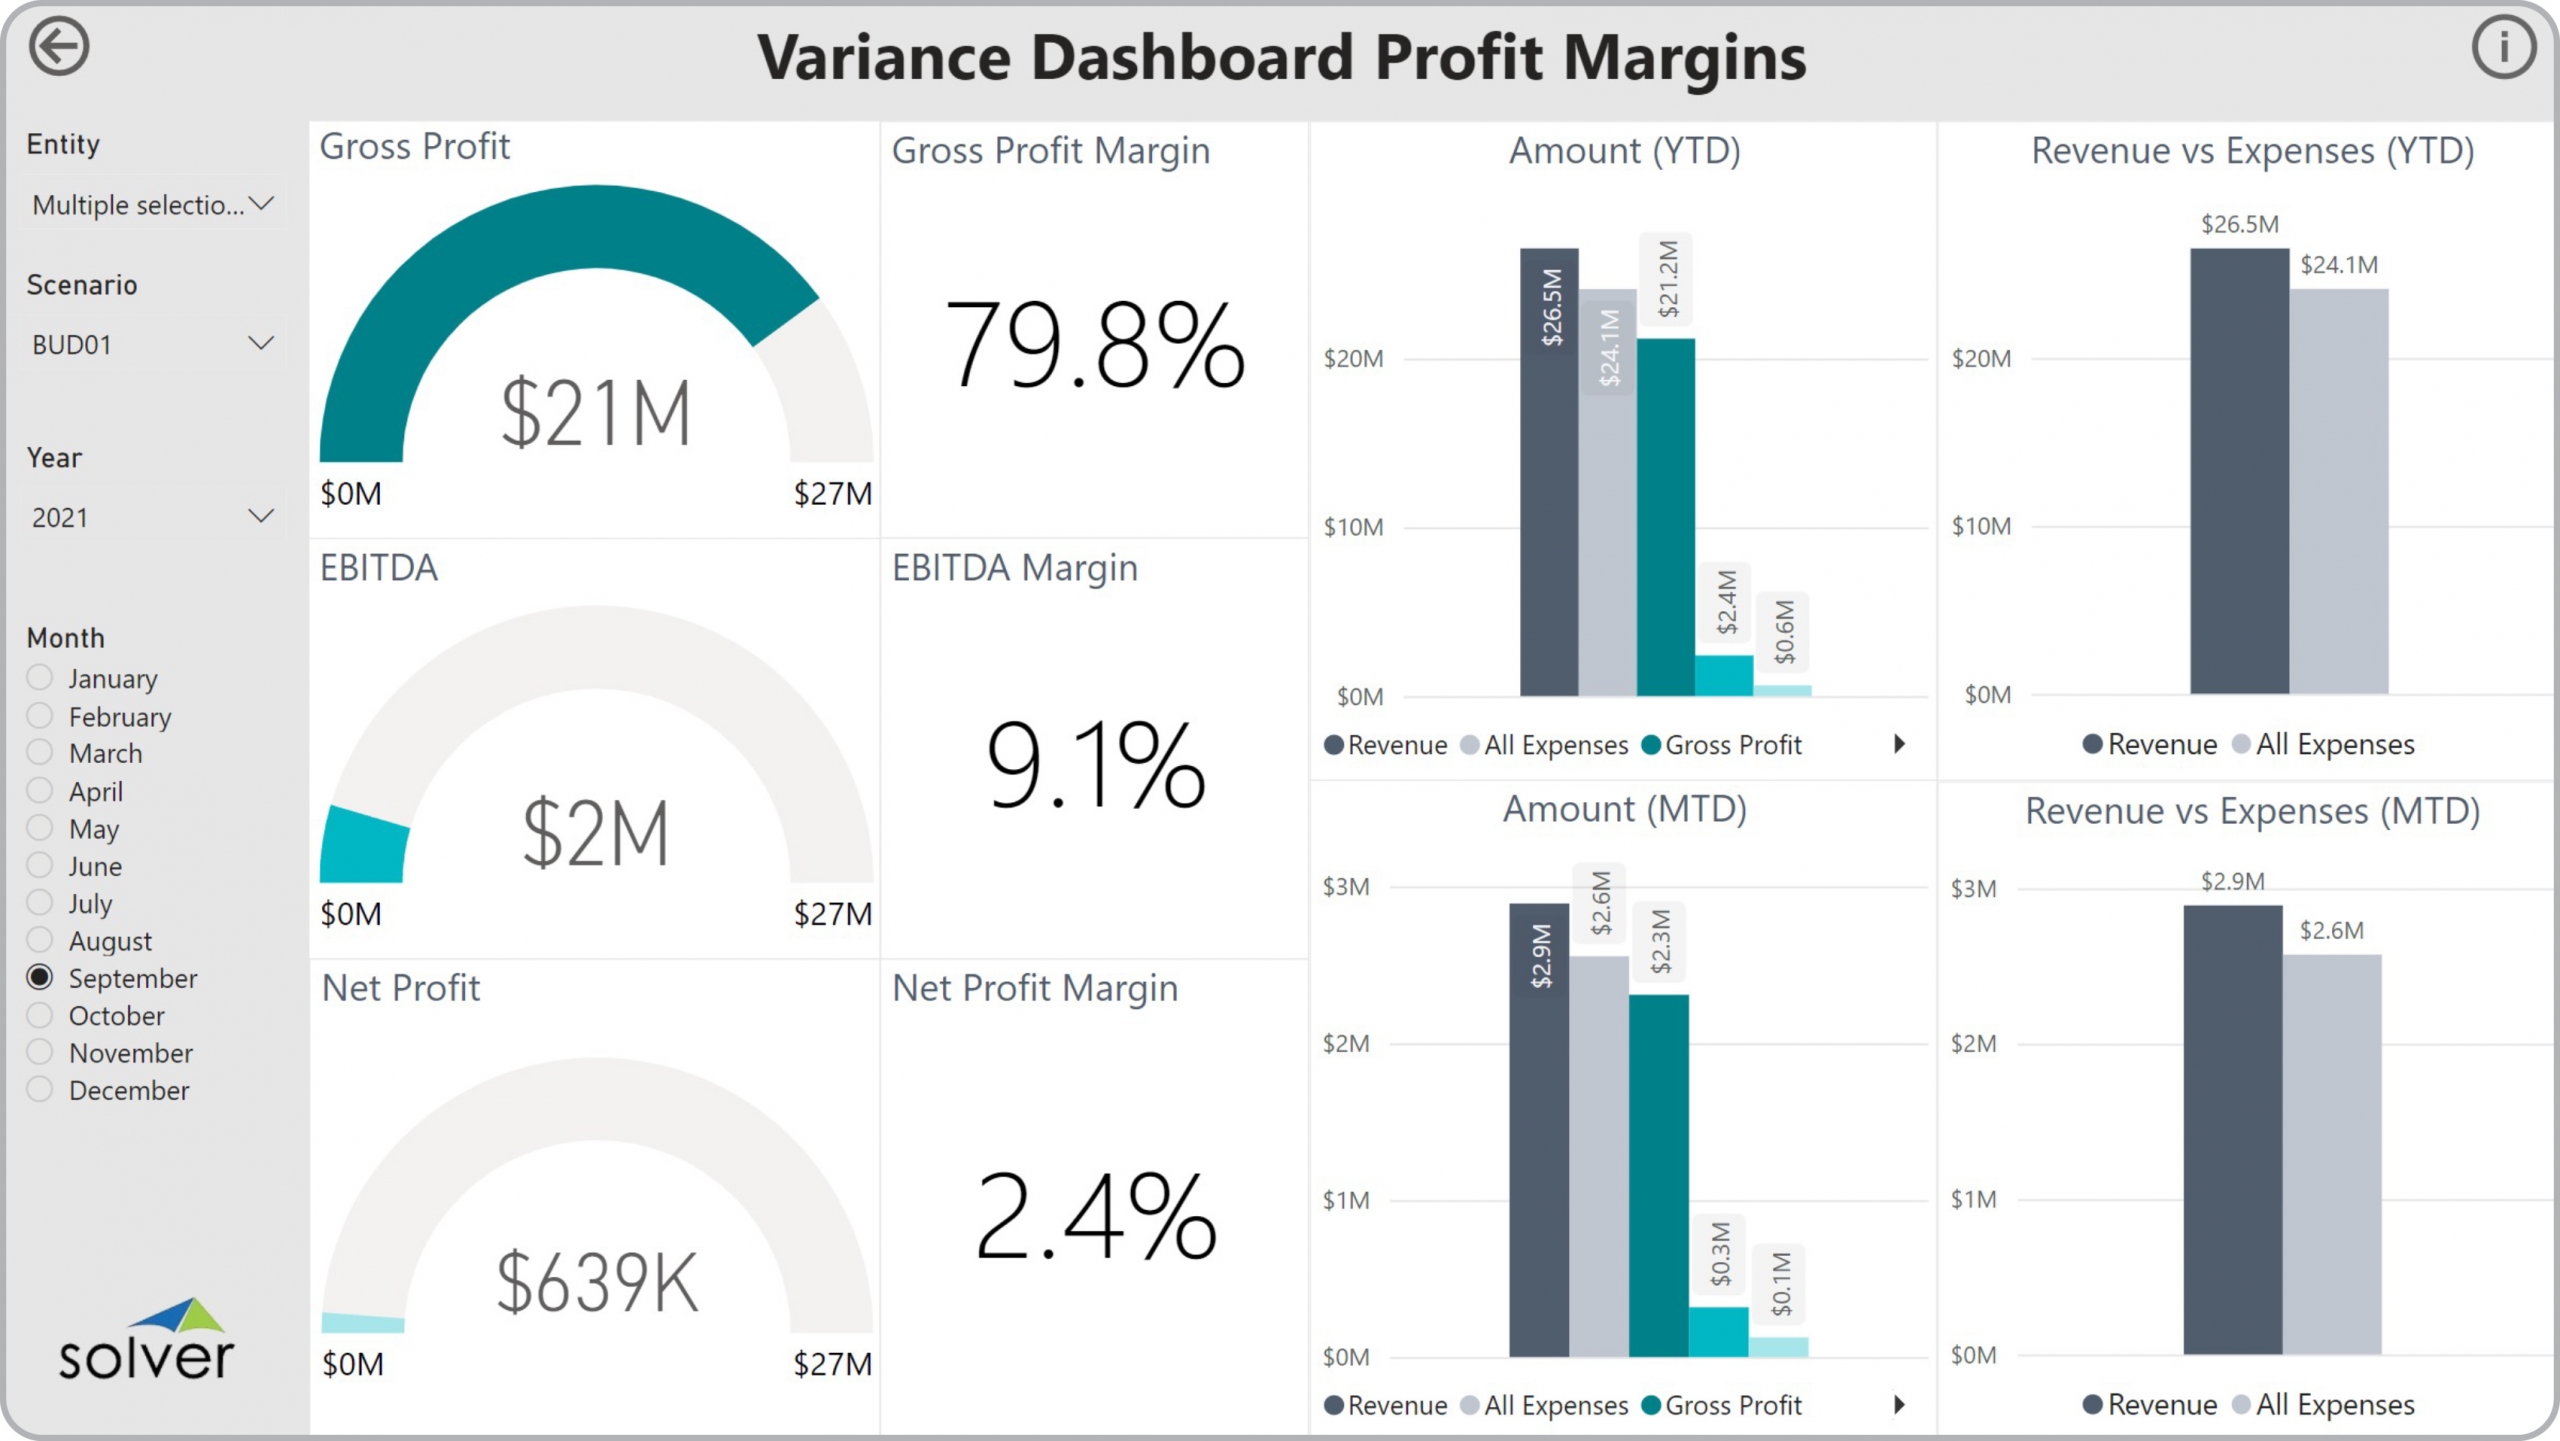 Example of an Profit Margin Variance Dashboard to Streamline the Monthly Analysis Process